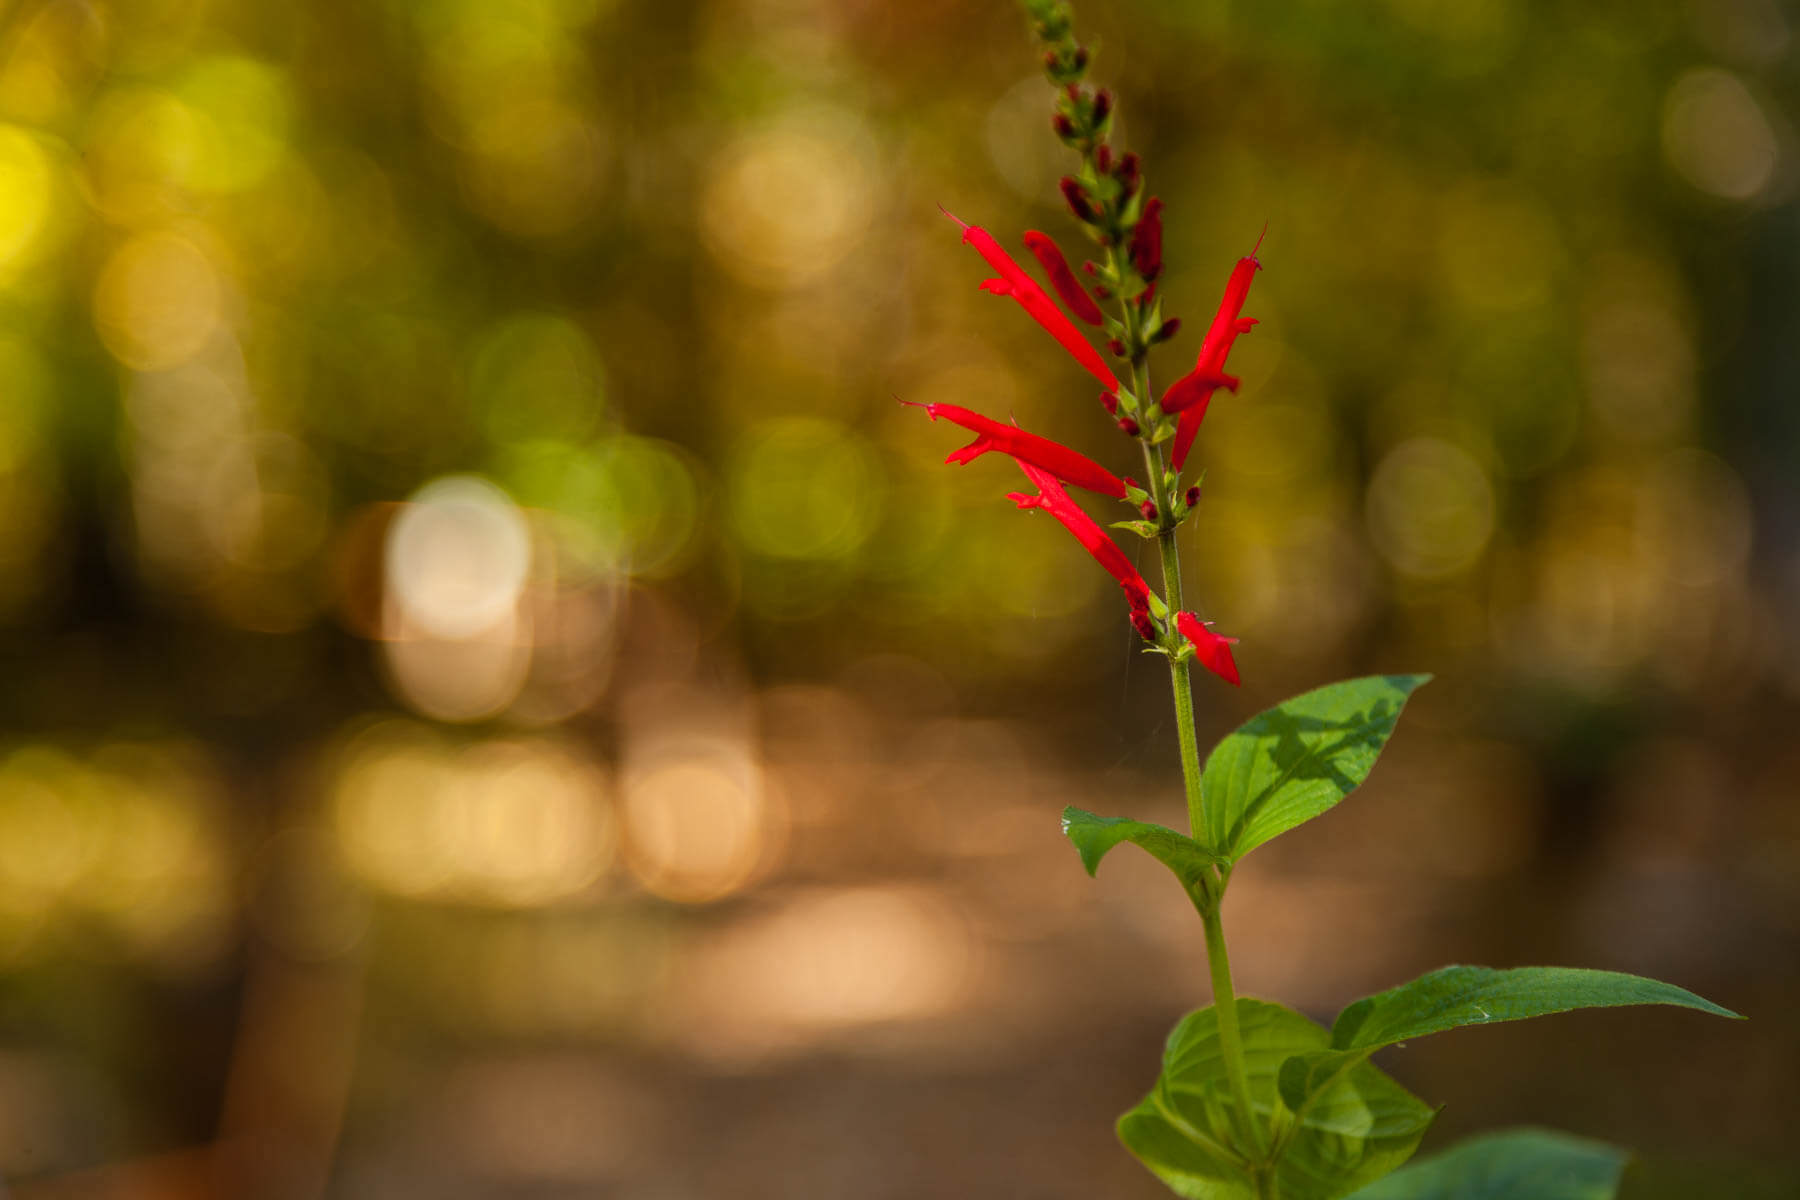 A single red flower stands in the shadowy forest